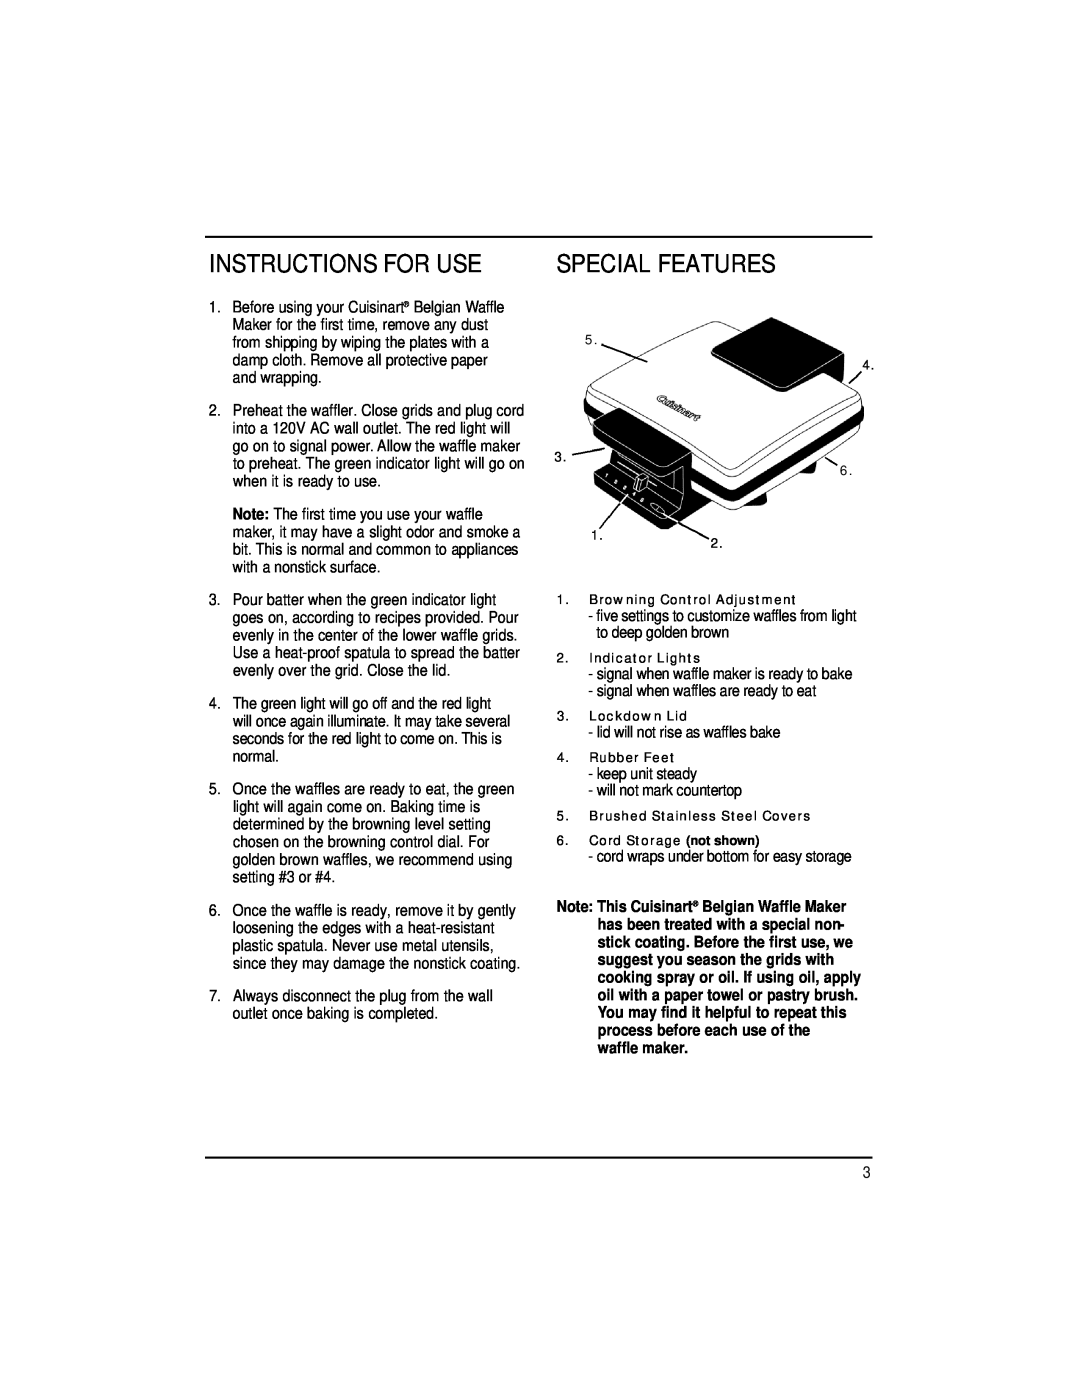 Cuisinart WMB-4A manual Instructions For Use, Special Features 